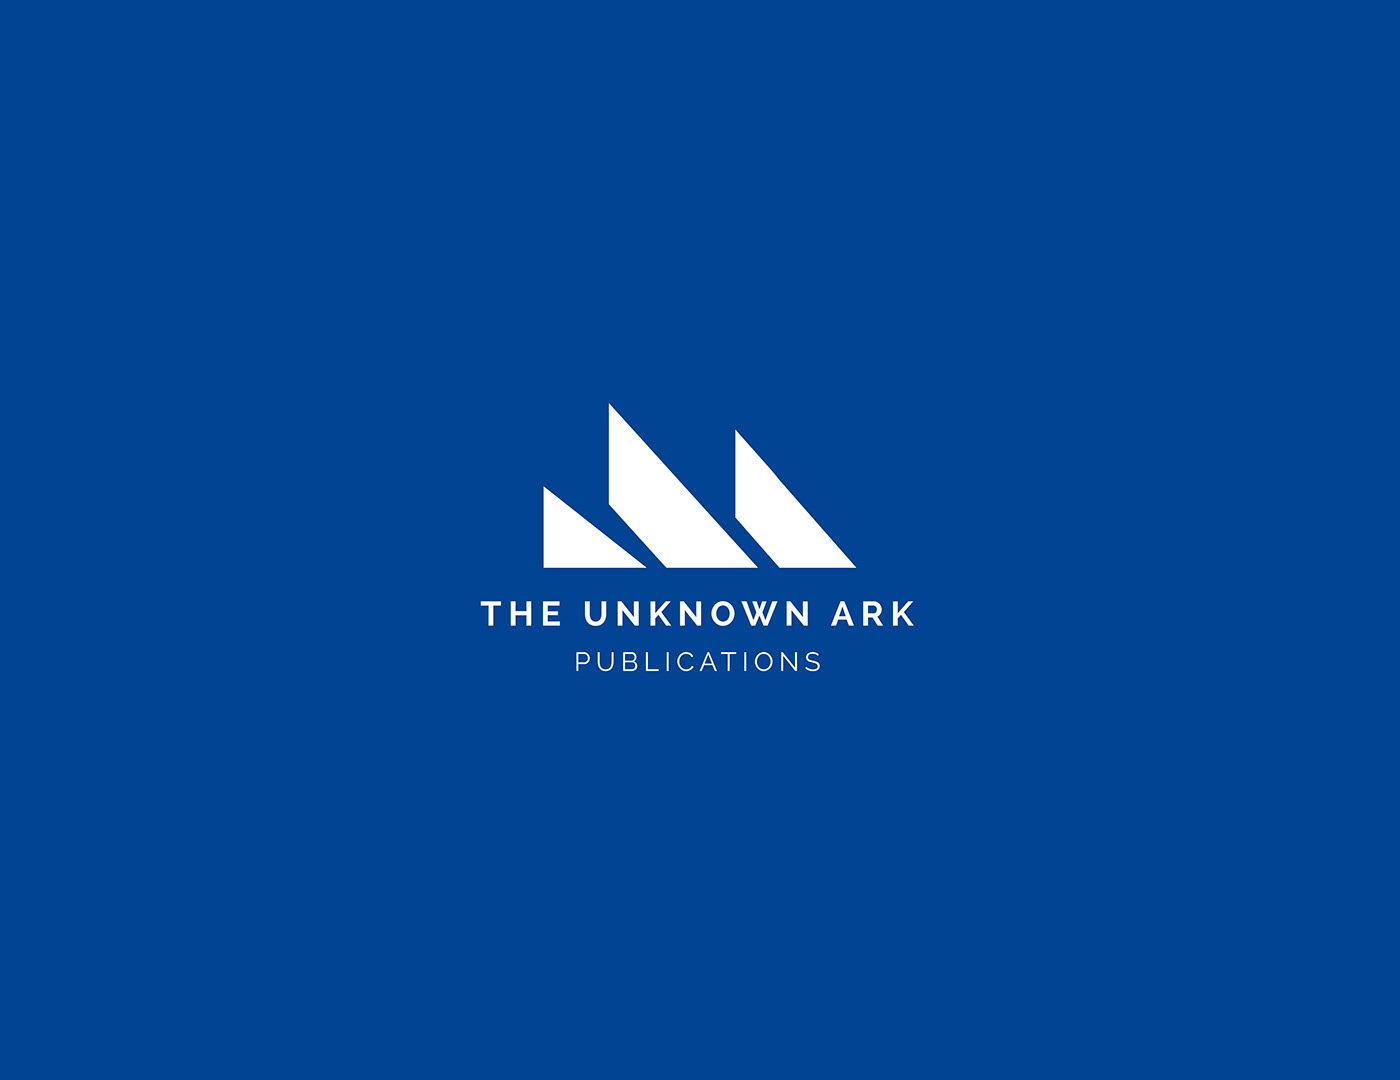 The unknown ark publications Logo 